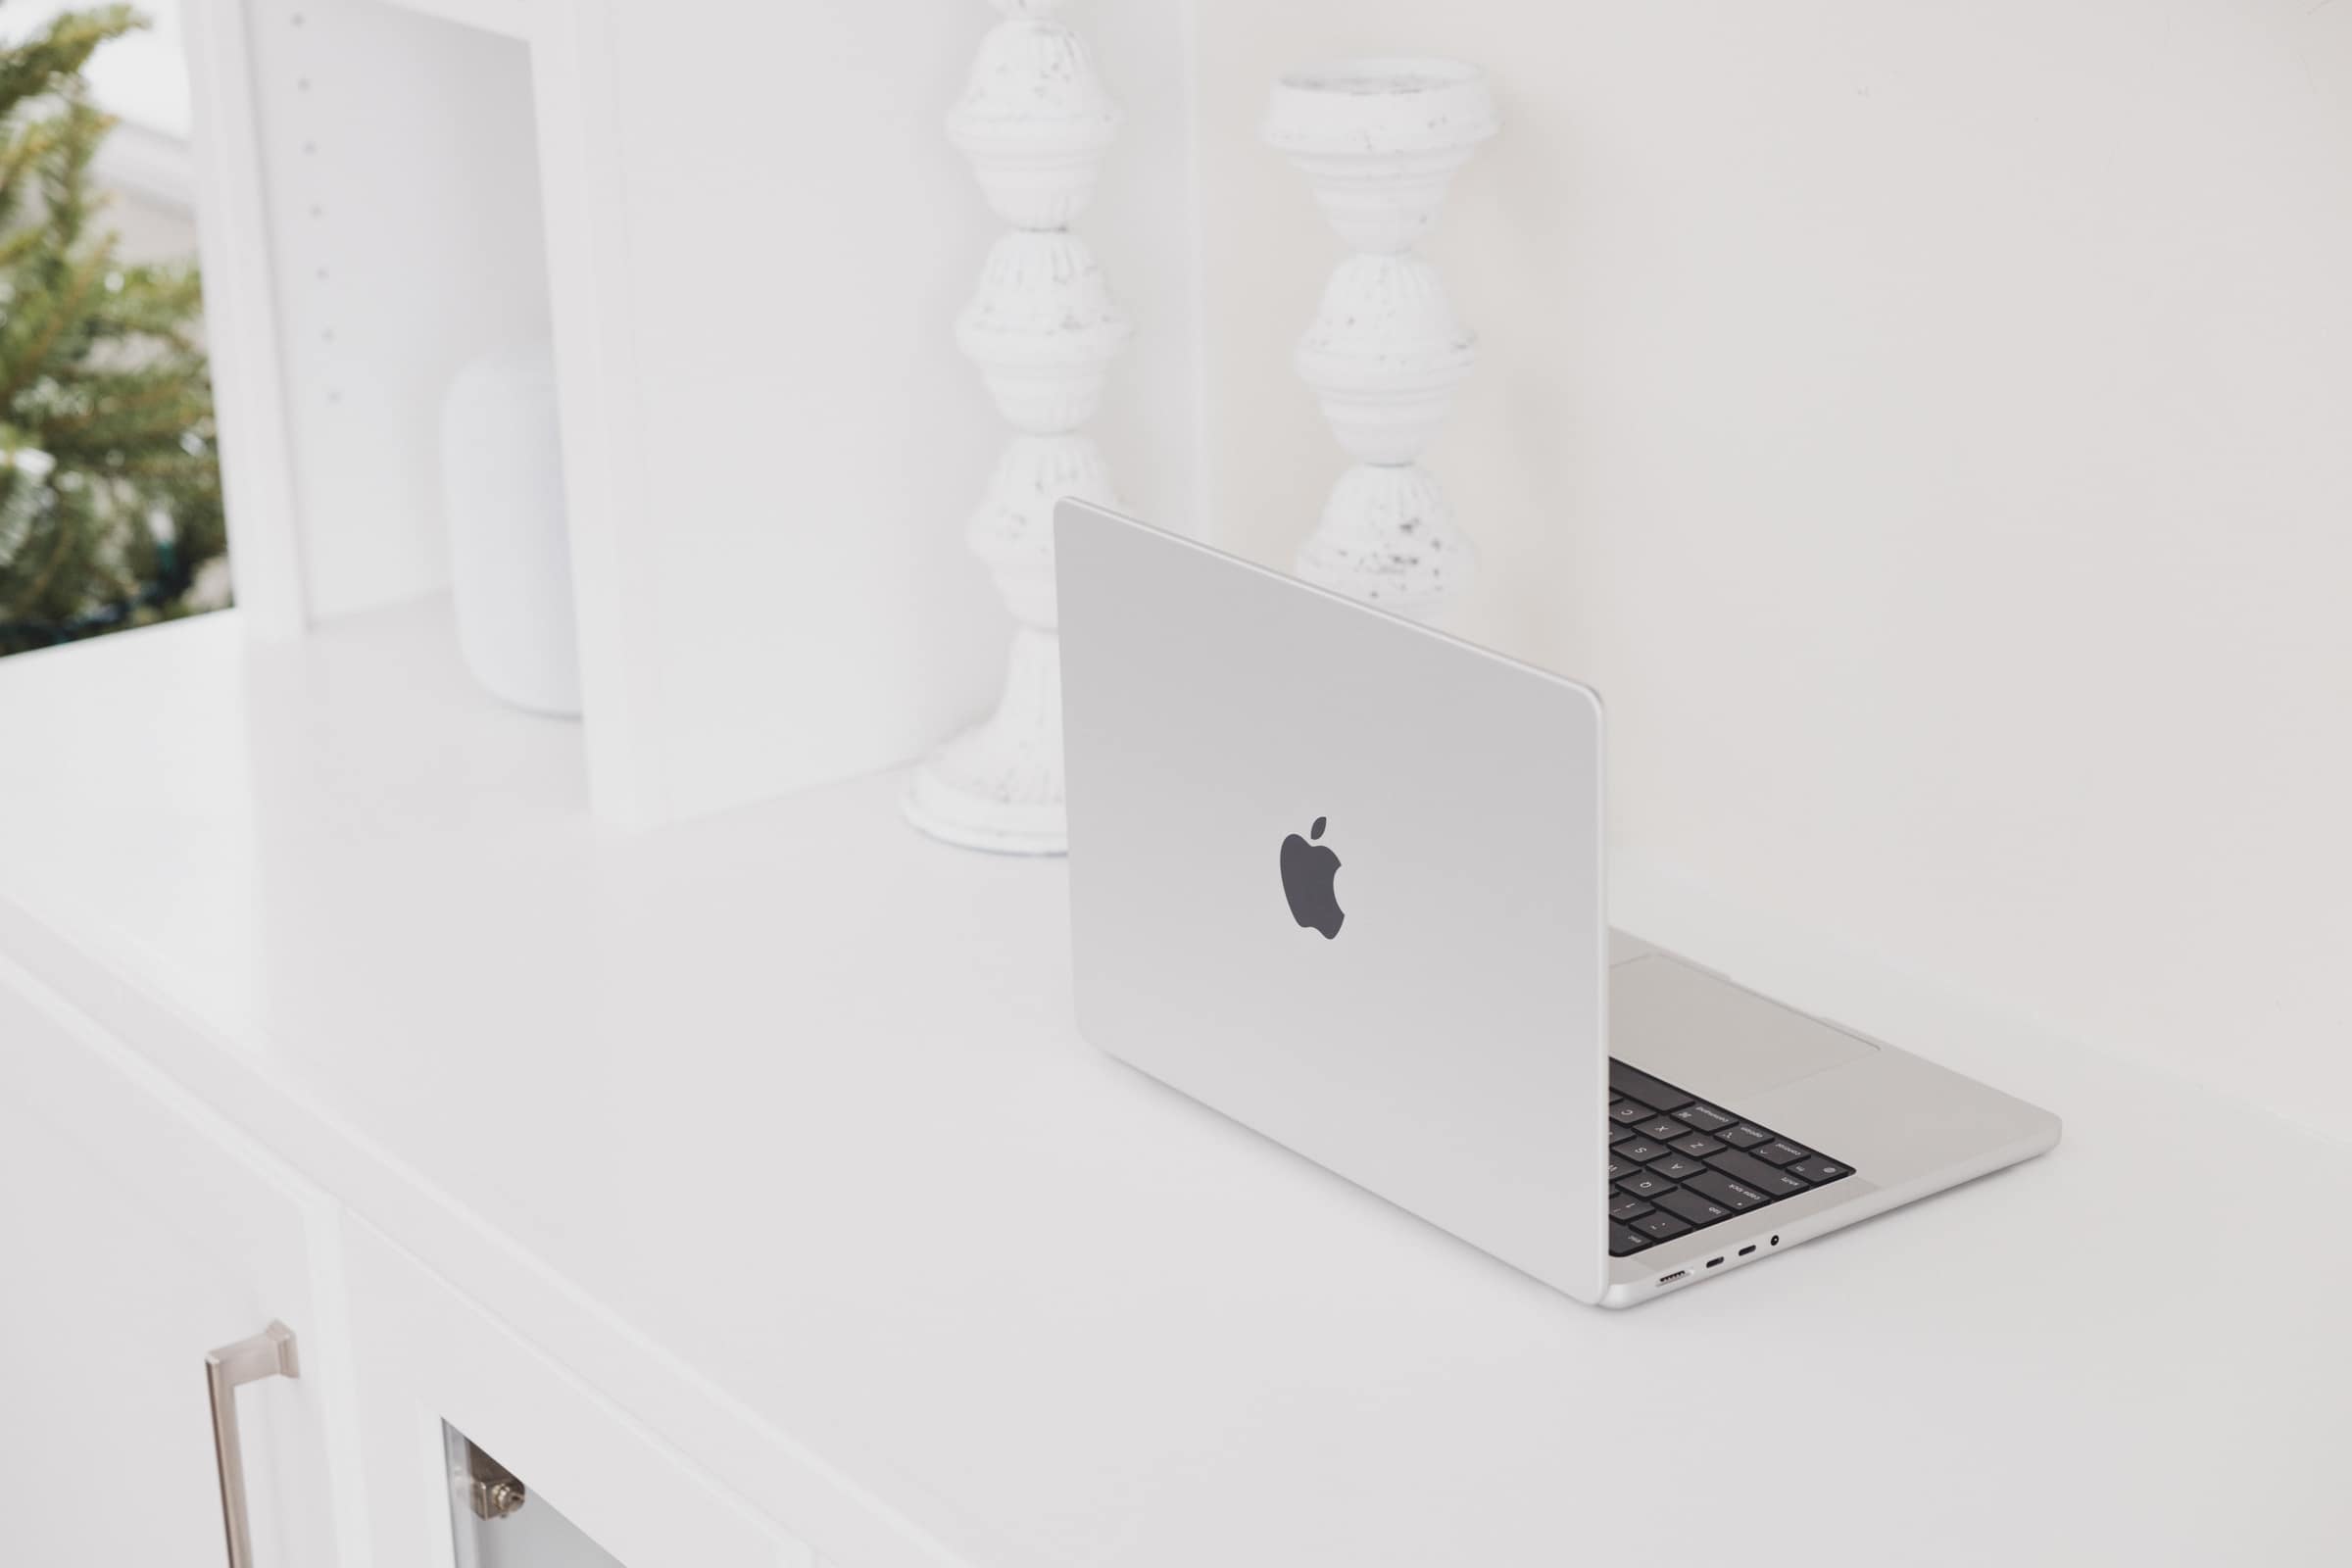 how to write an essay on macbook pro